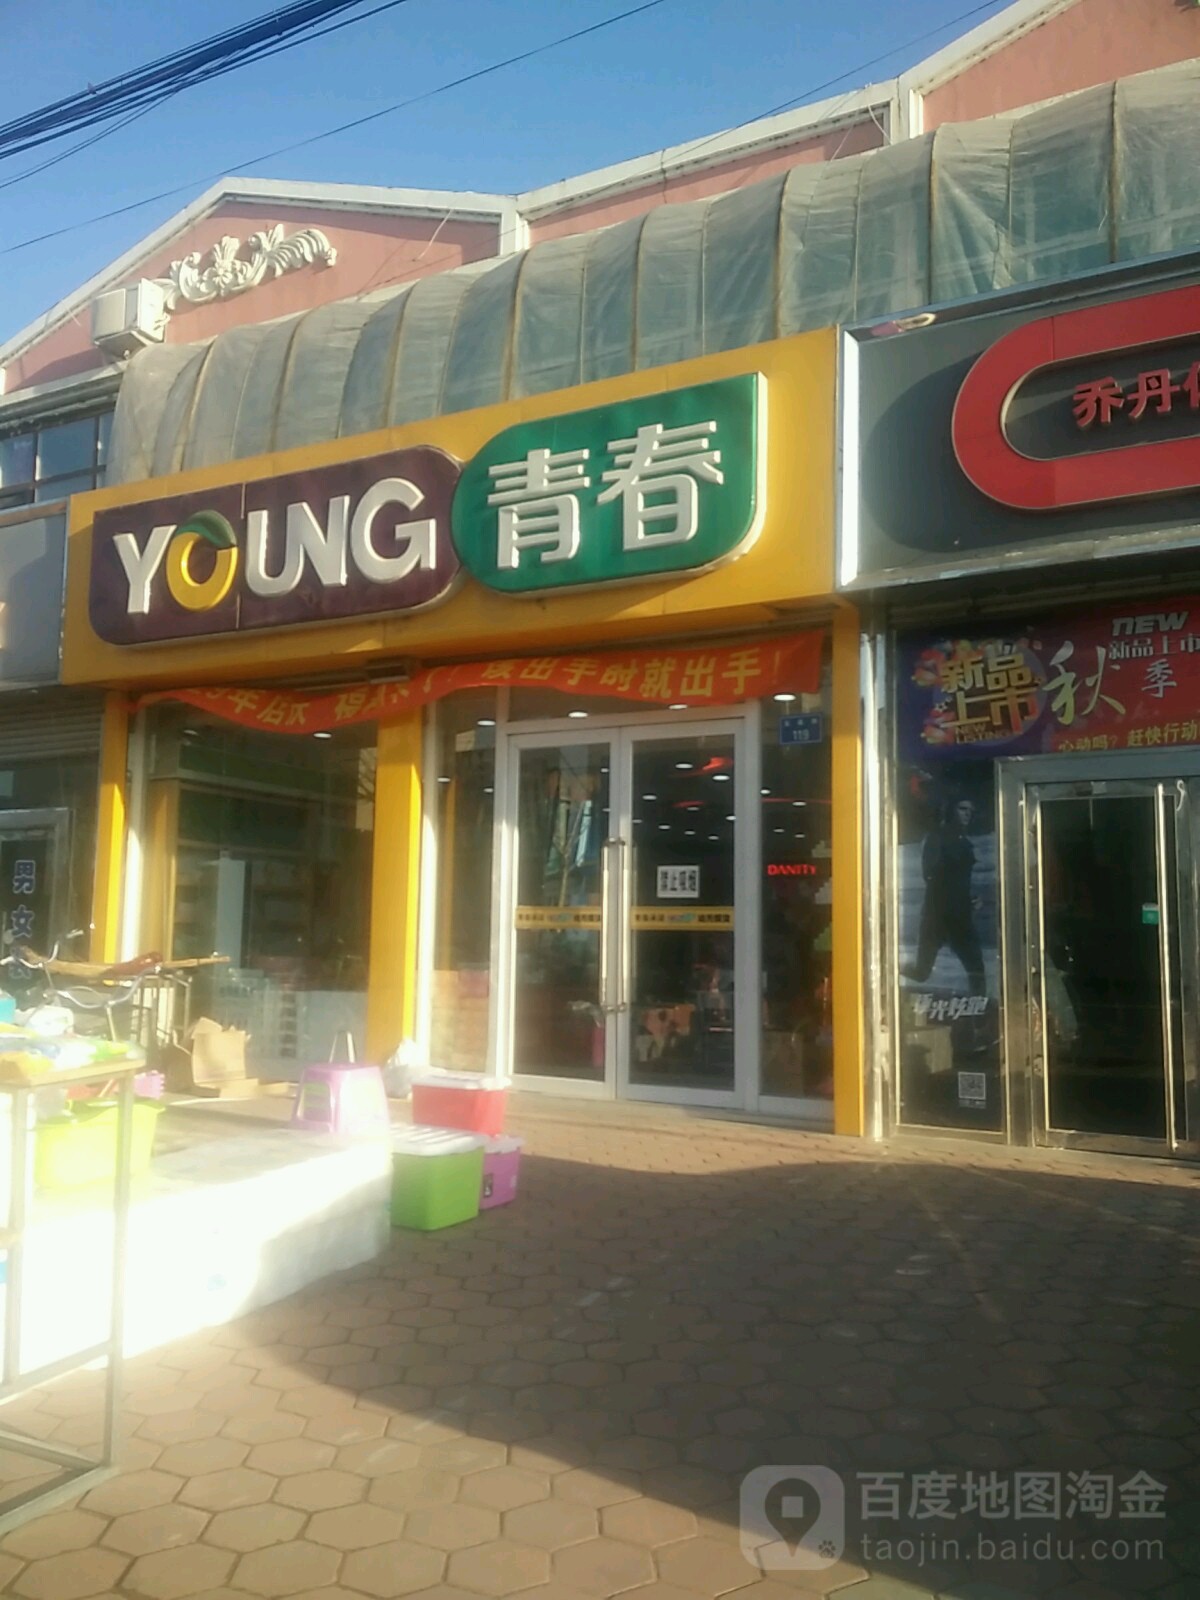 YOUNG青春